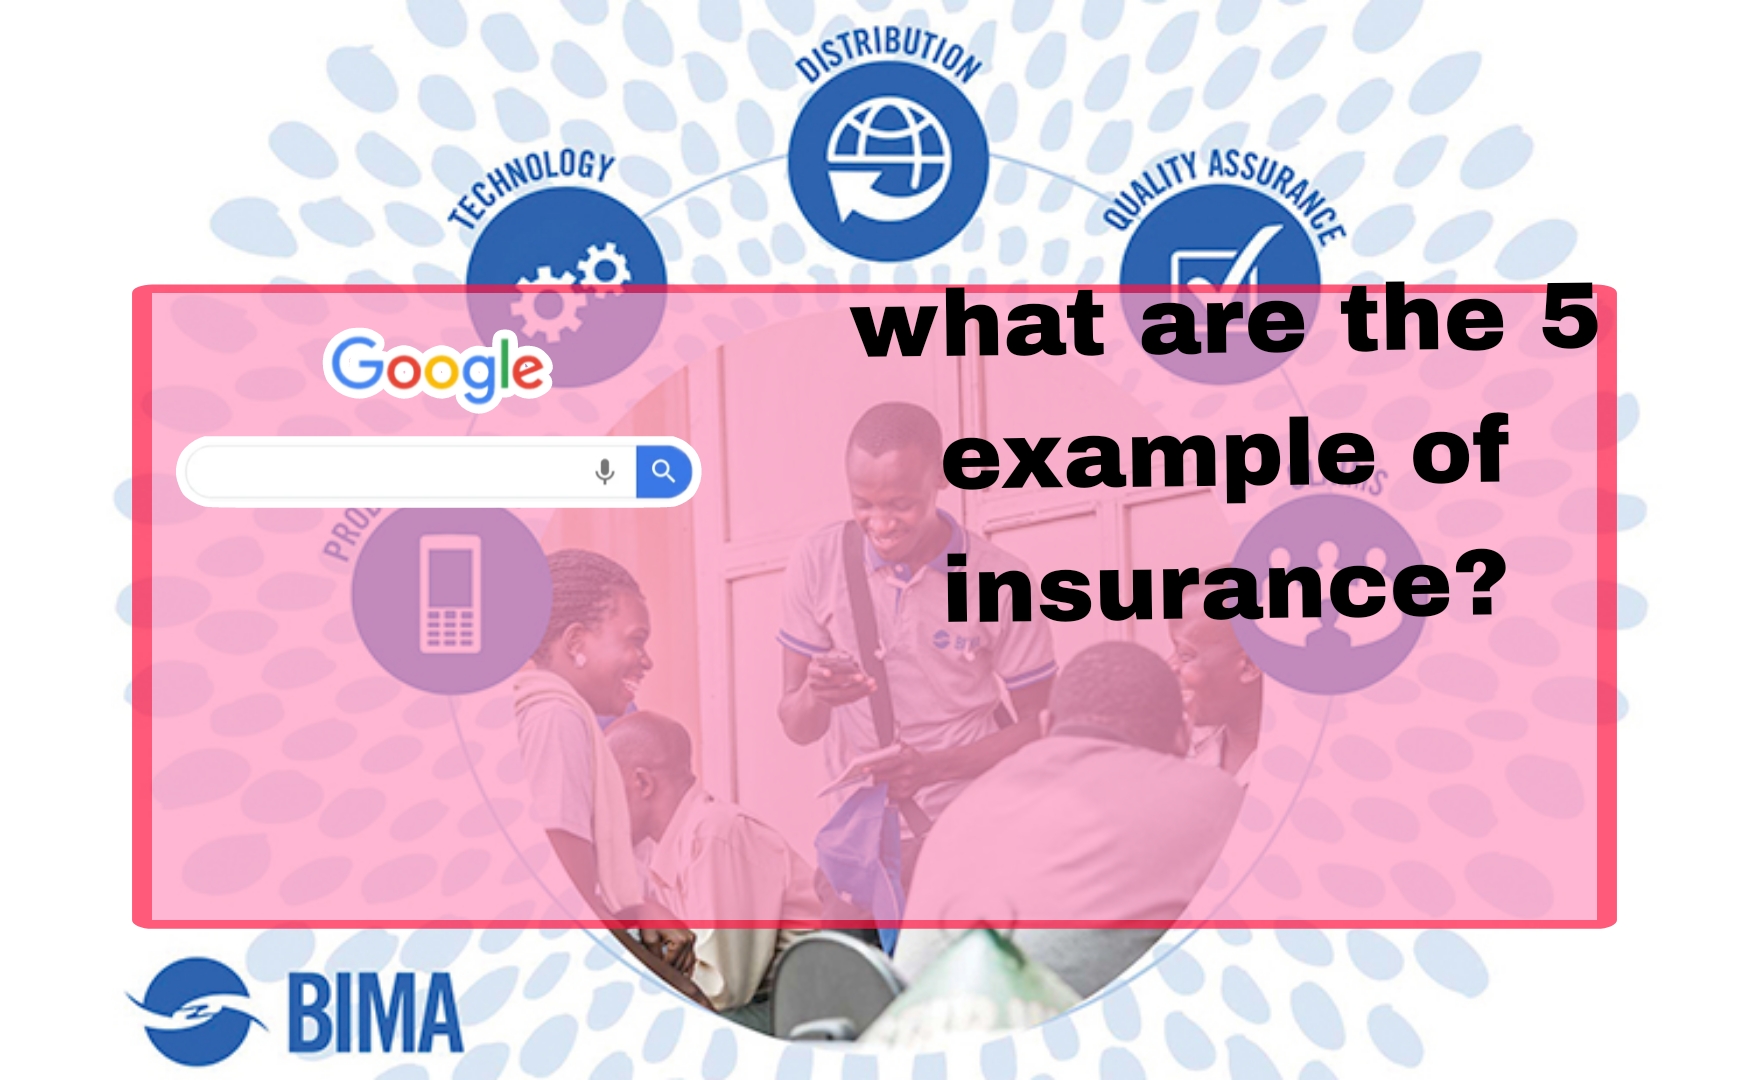 what are the 5 example of insurance?